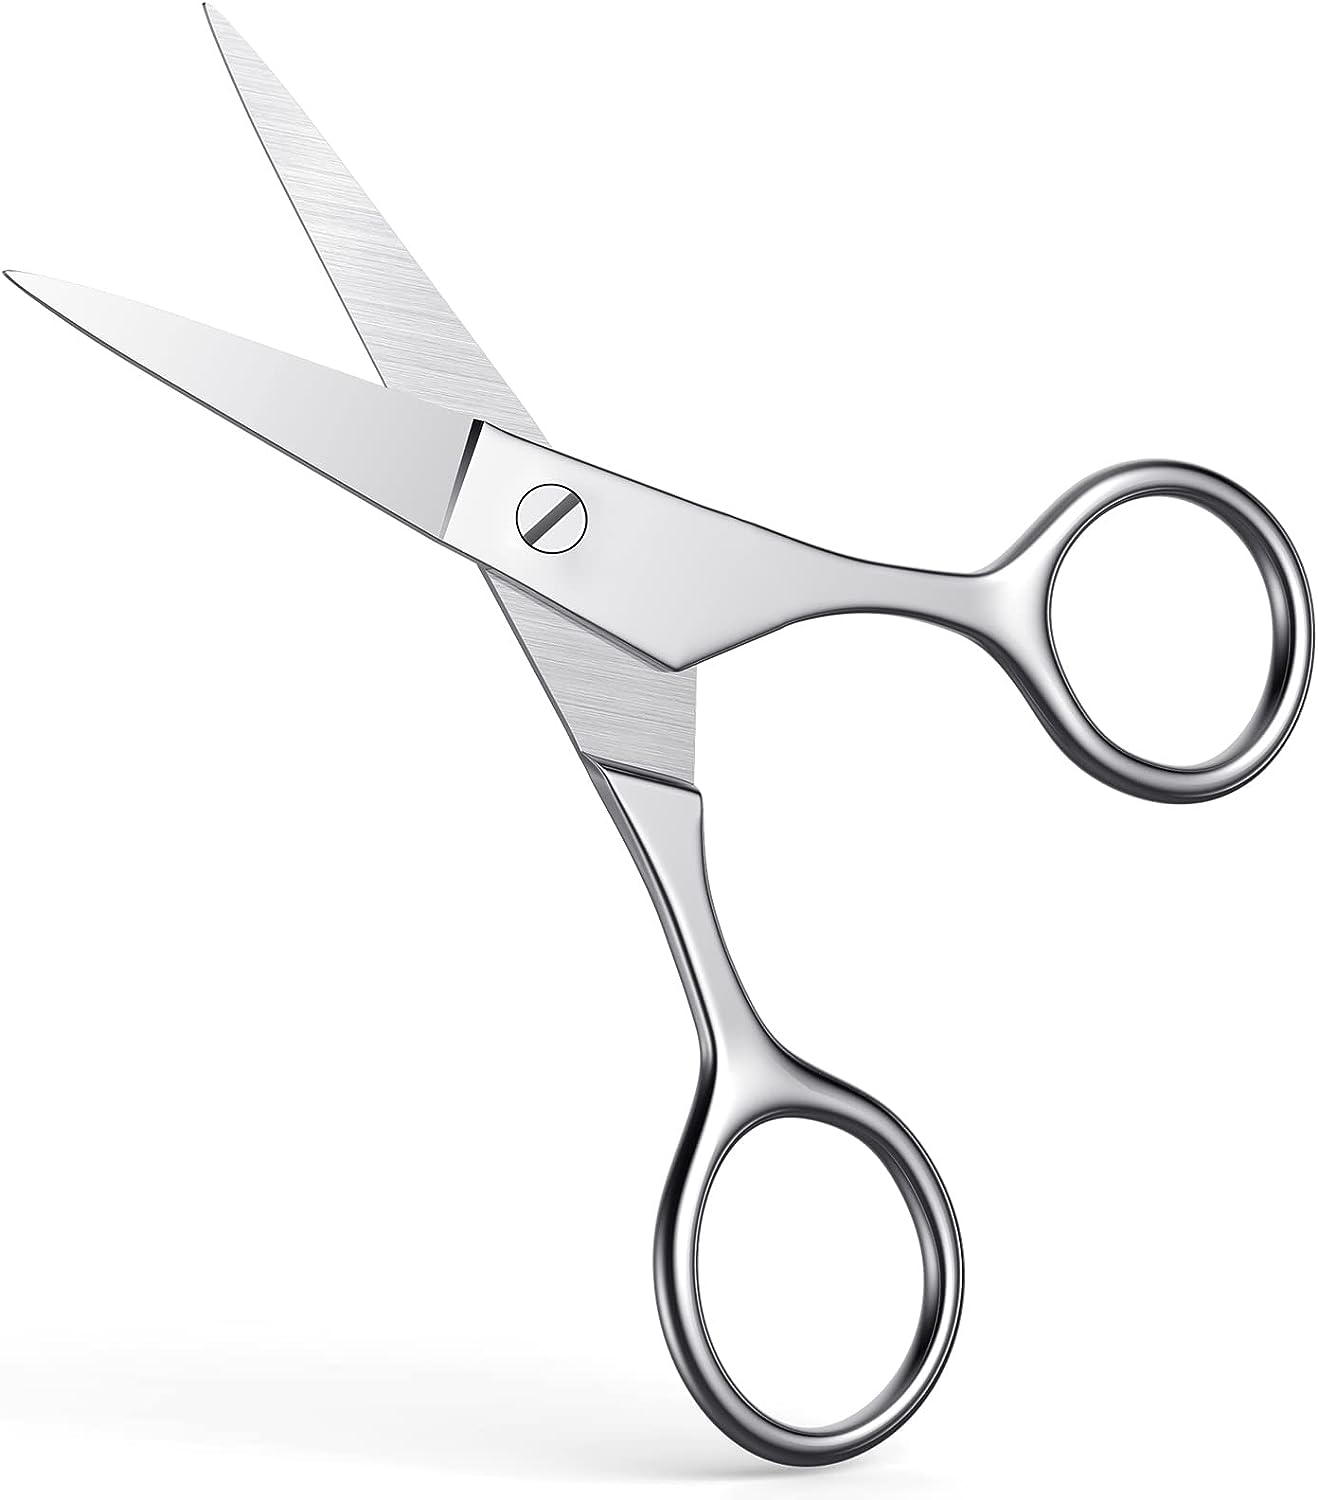 Melwey Eyebrow Scissors & Small Cuticle Scissors, Curved Blade Manicure Scissors. Stainless-Steel Scissors for Eyelashes, Facial Hair, Pubic, Men